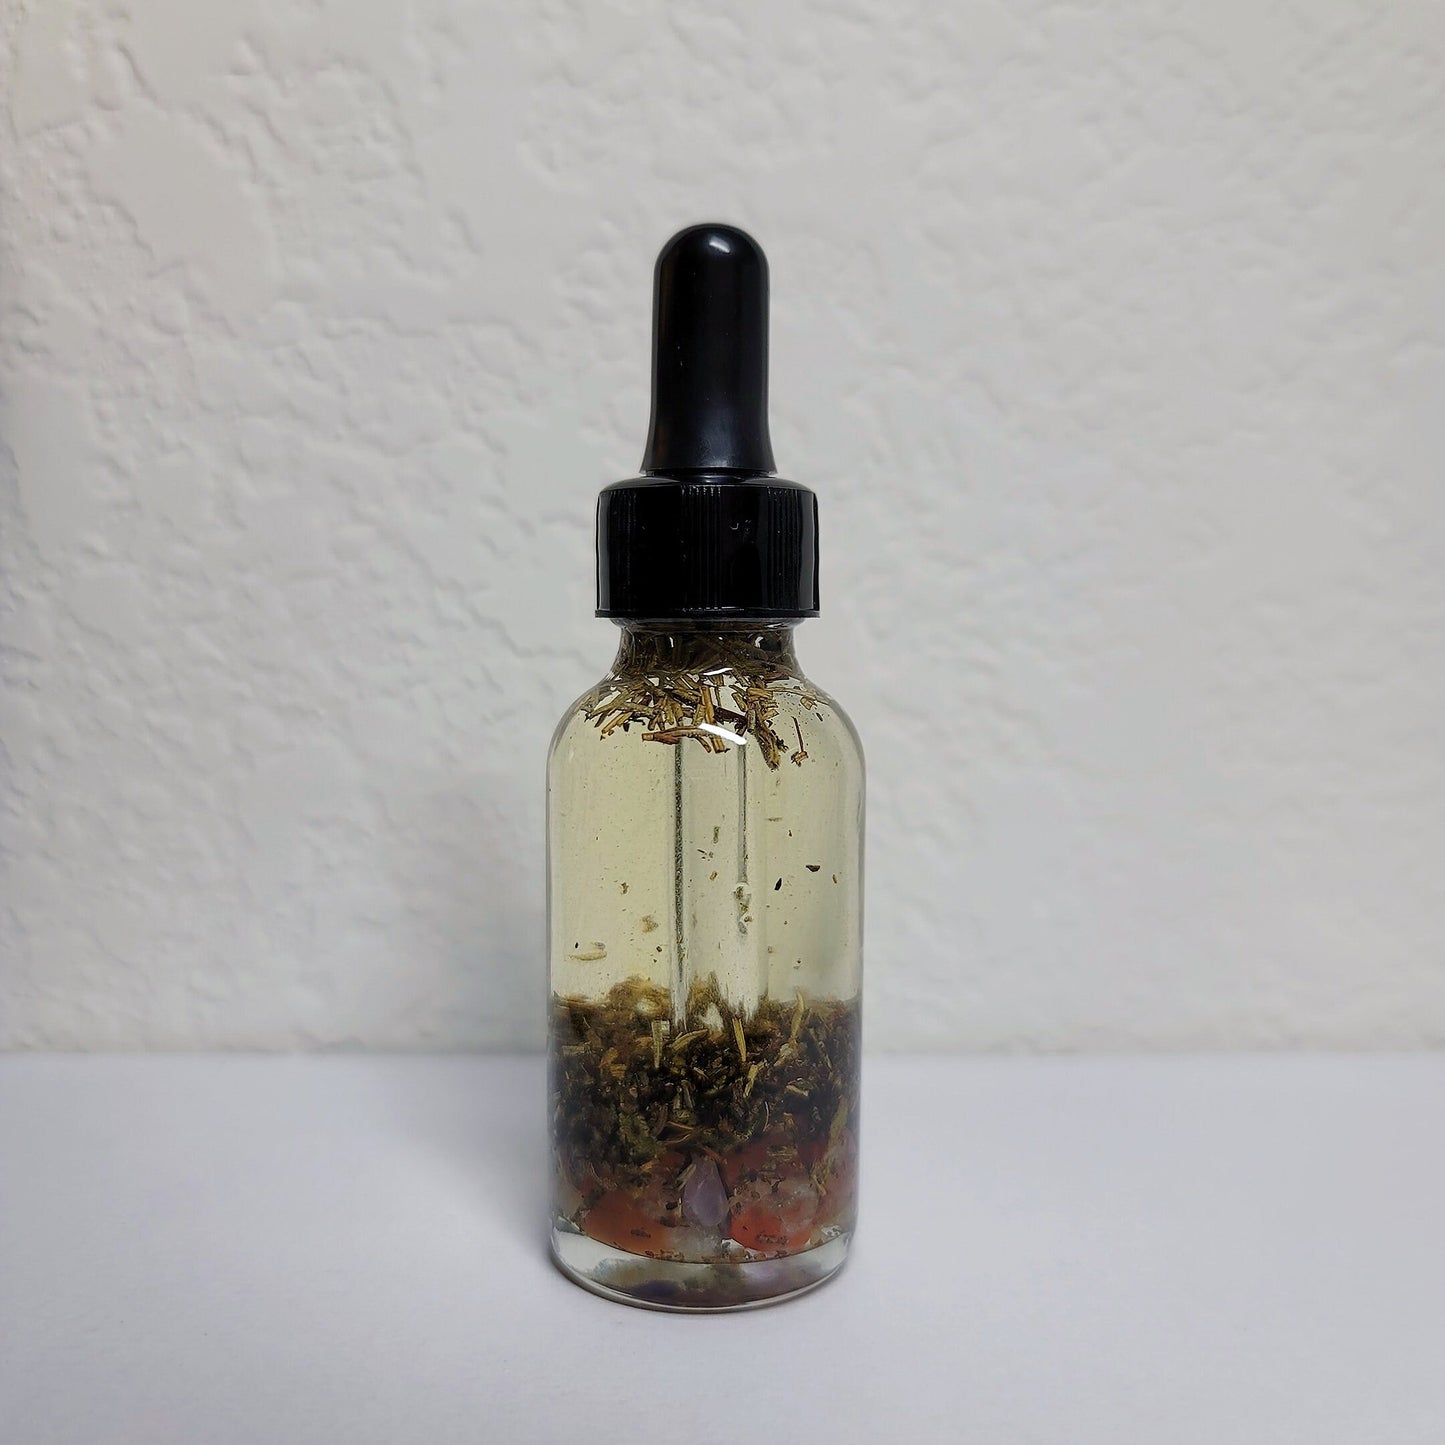 Hestia Goddess Oil | Ritual & Spell Work, Altars, Invocation, Manifestation, and Intentions